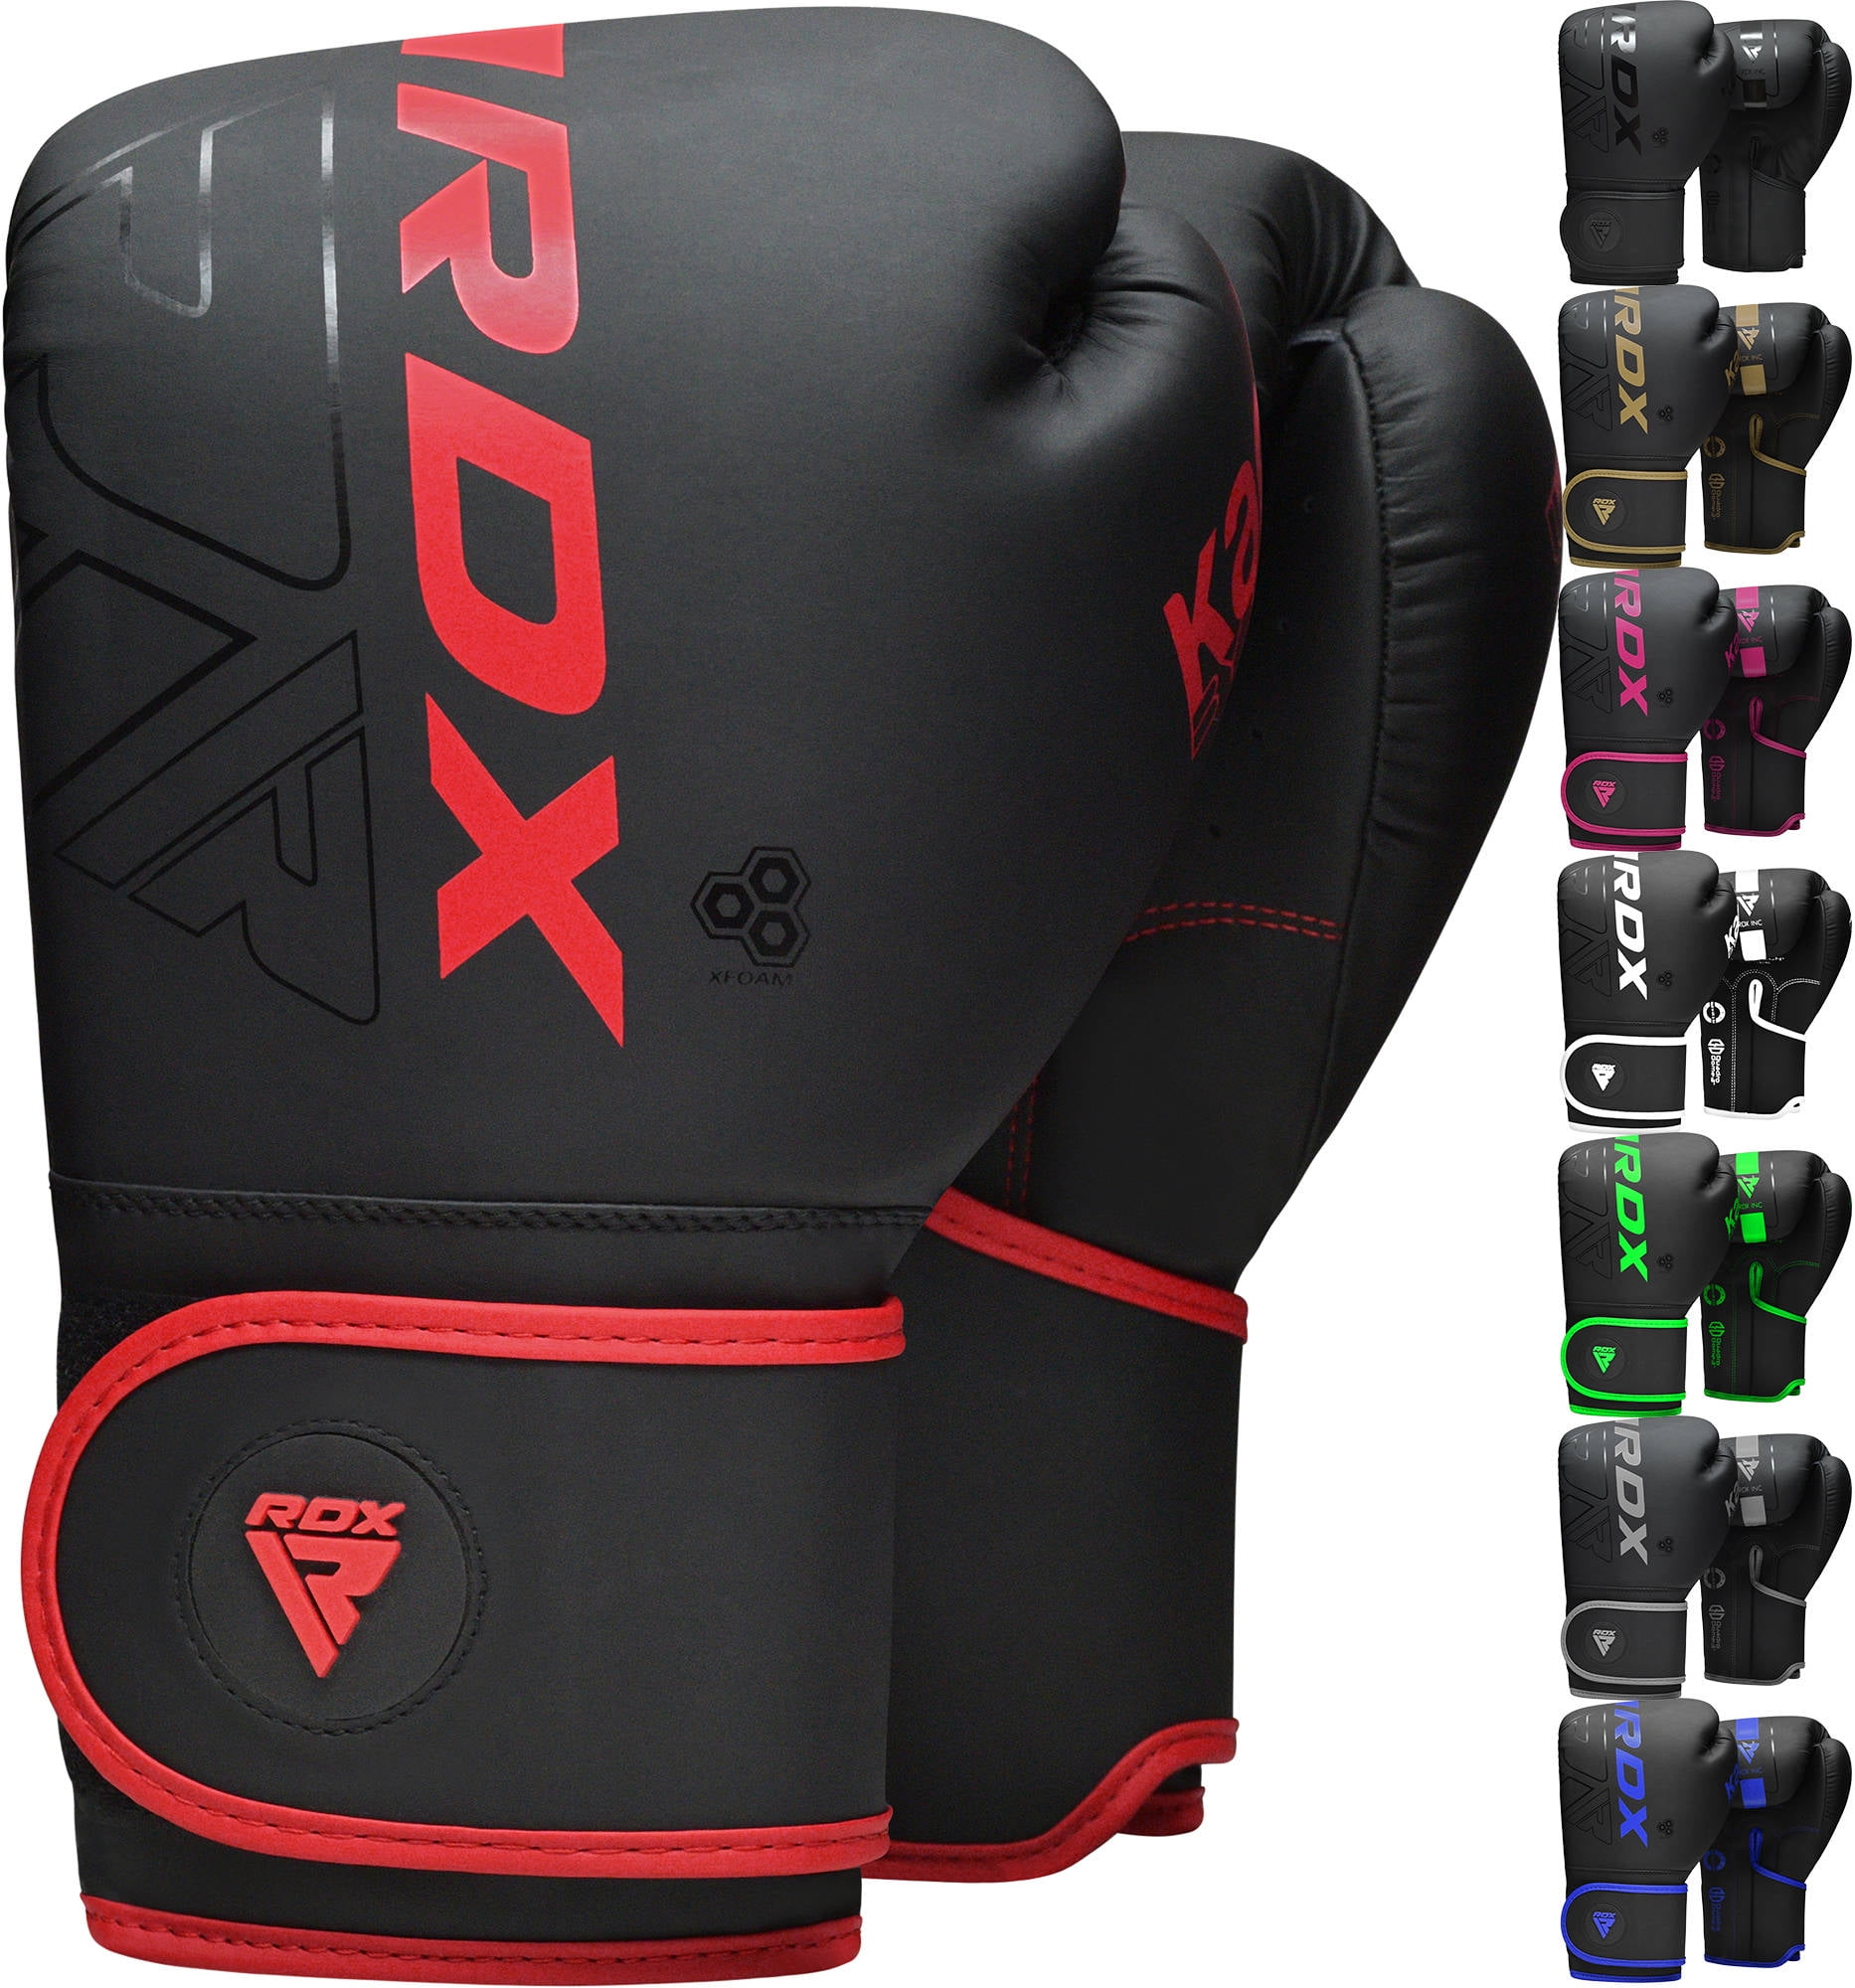 RDX Curved Focus Pads Mitts & Kick Boxing Gloves Hook and Jab Punching Bag MMA C 